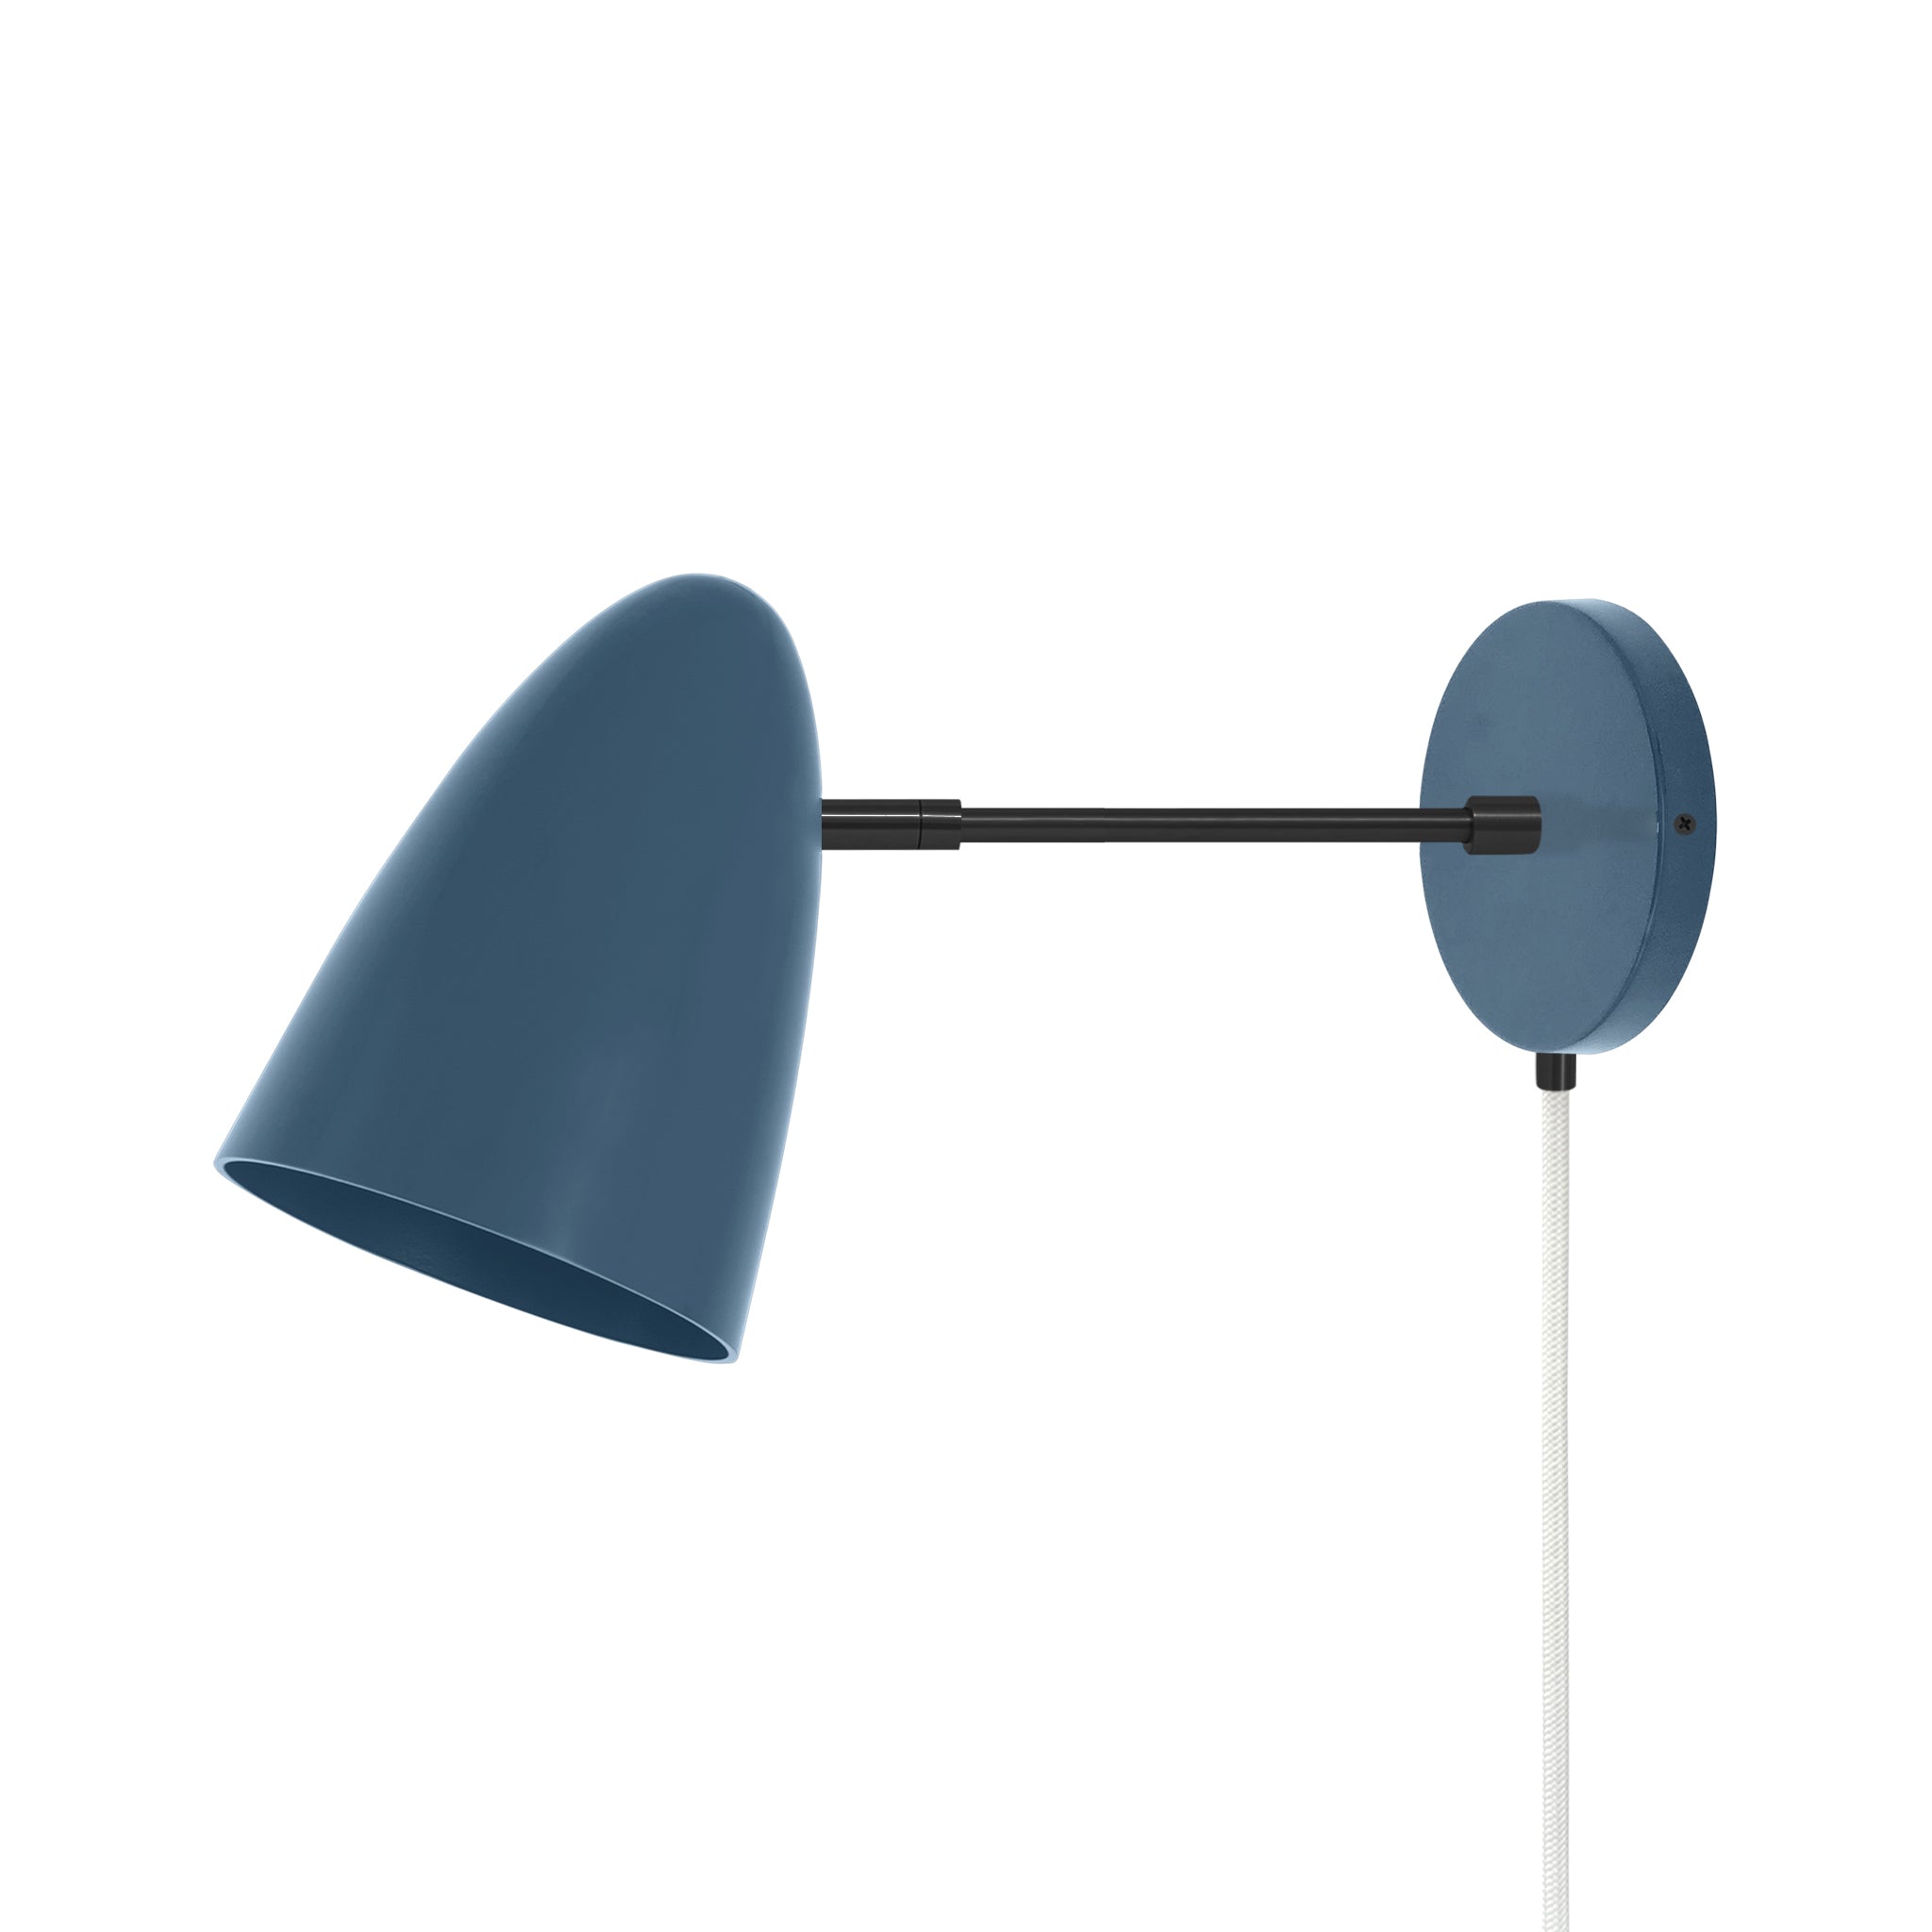 Black and slate blue color Boom plug-in sconce 6" arm Dutton Brown lighting